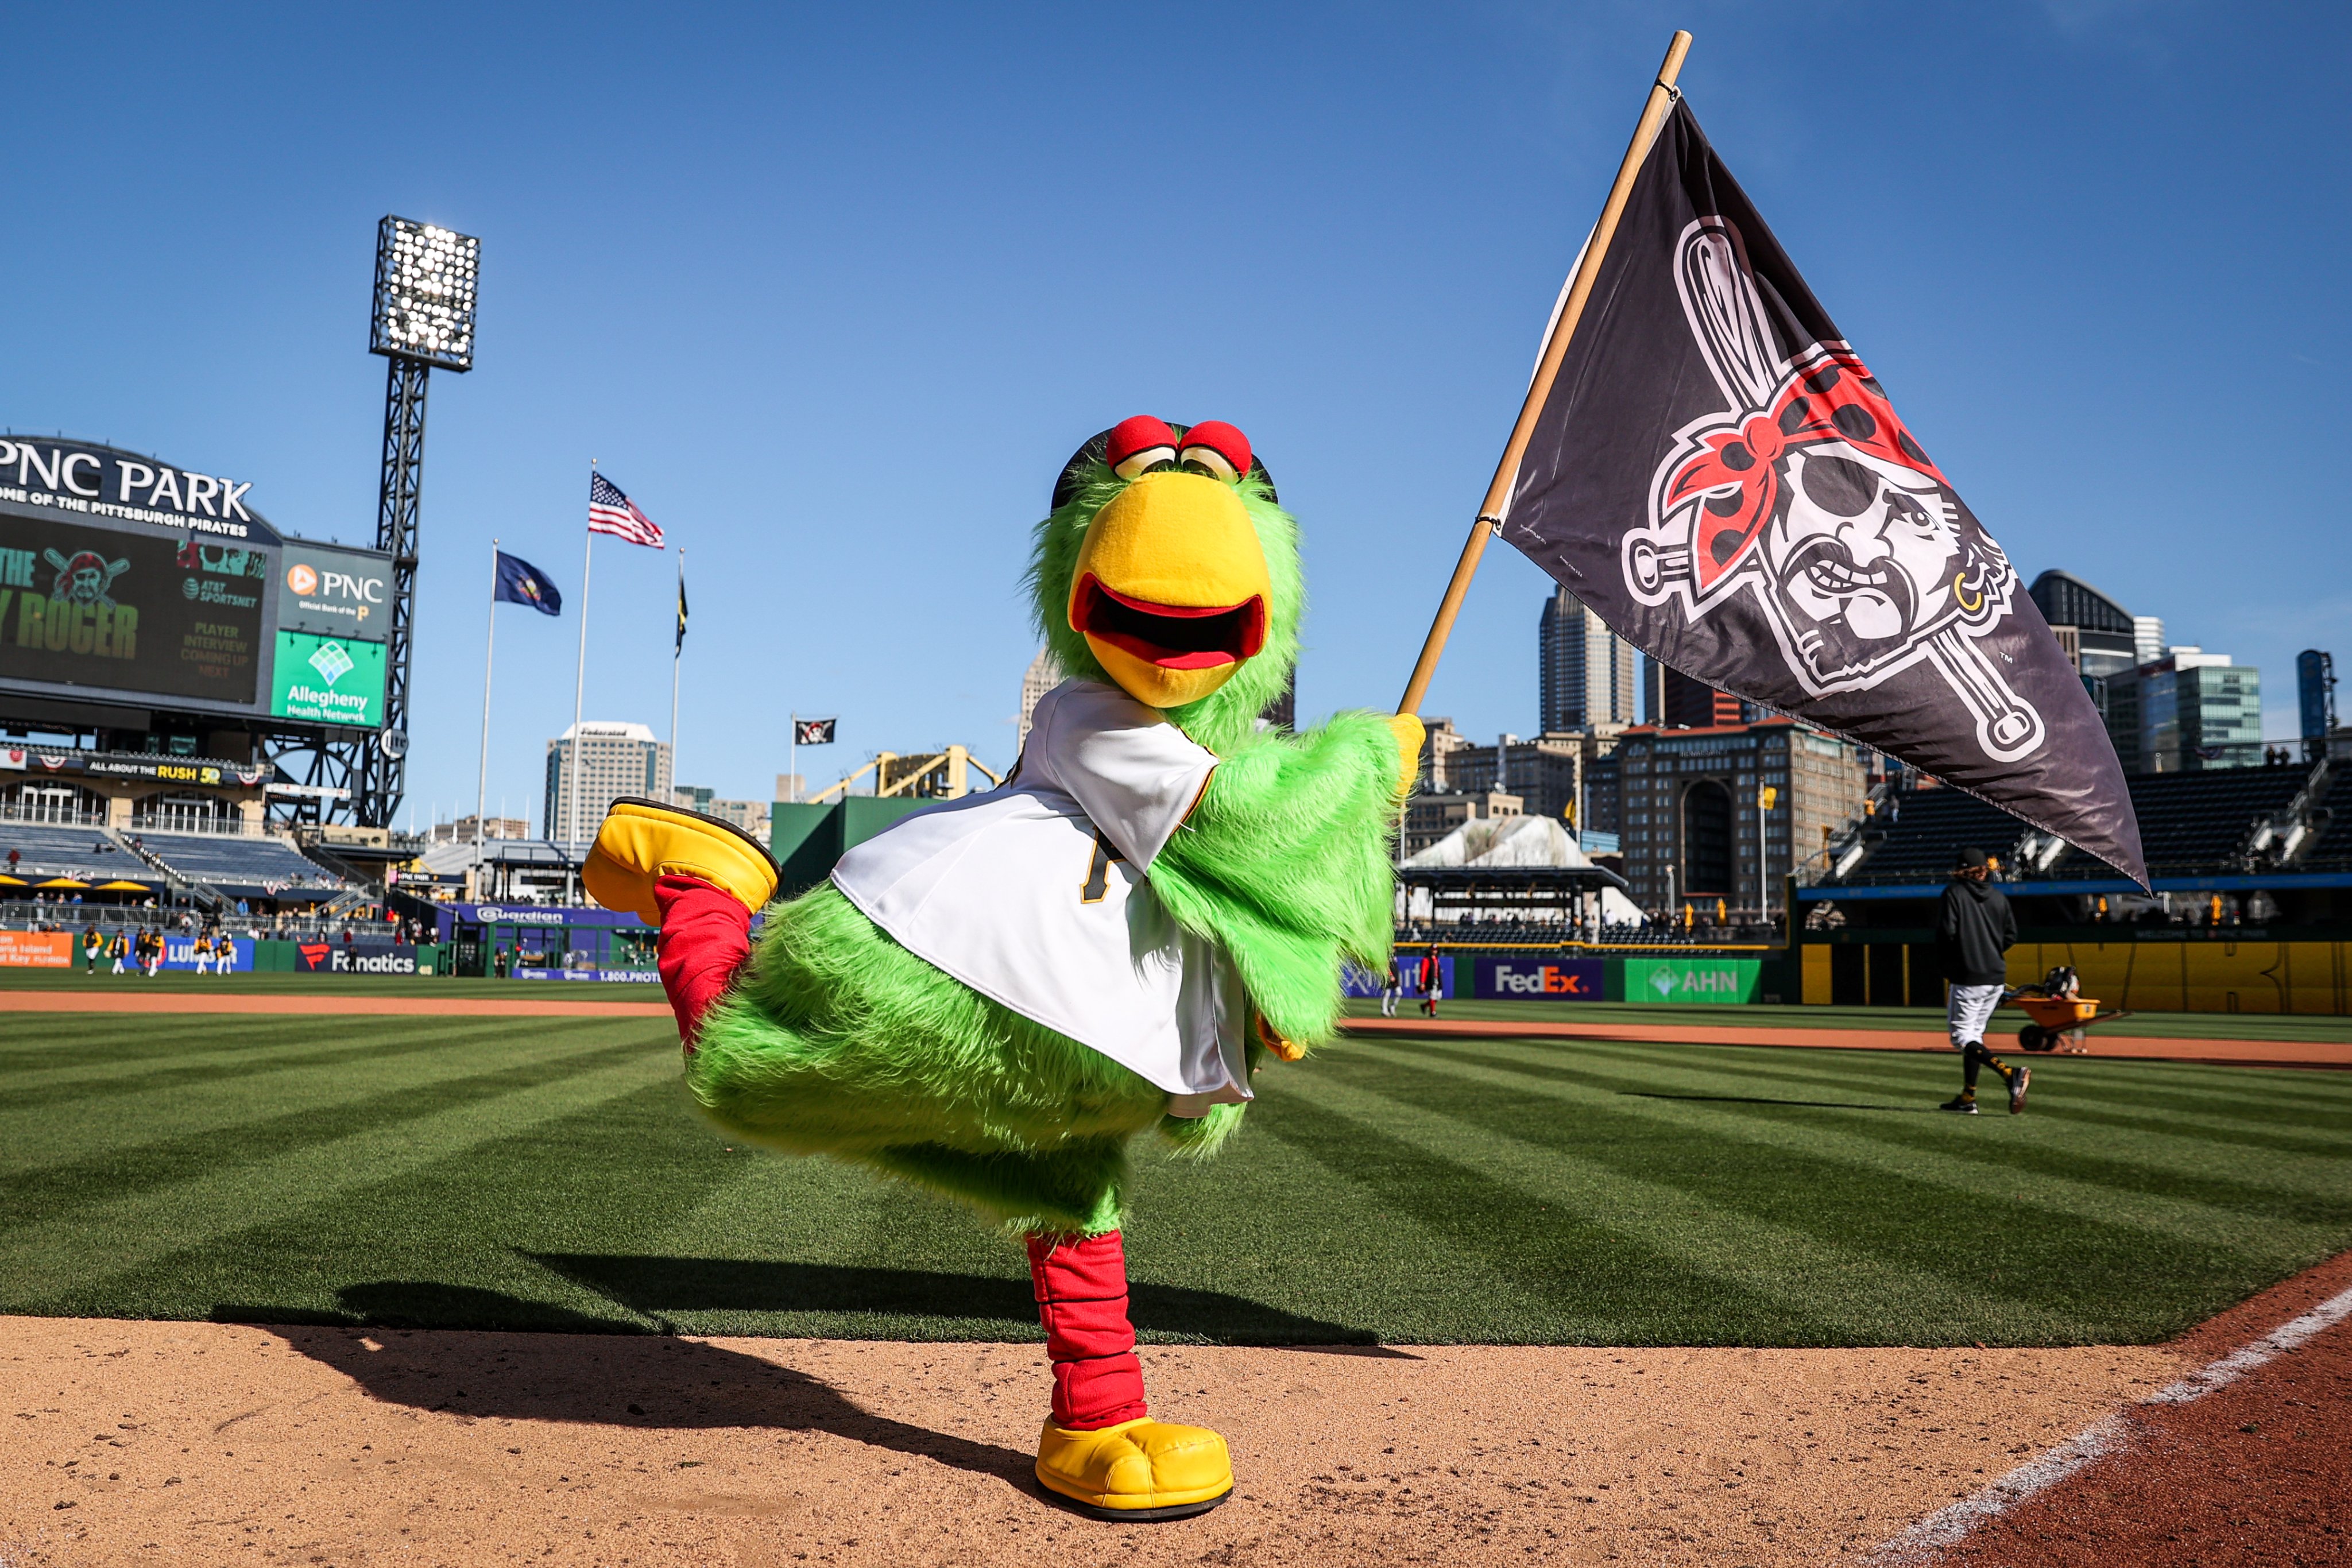 The Pirate Parrot (@Pirate_Parrot) / X